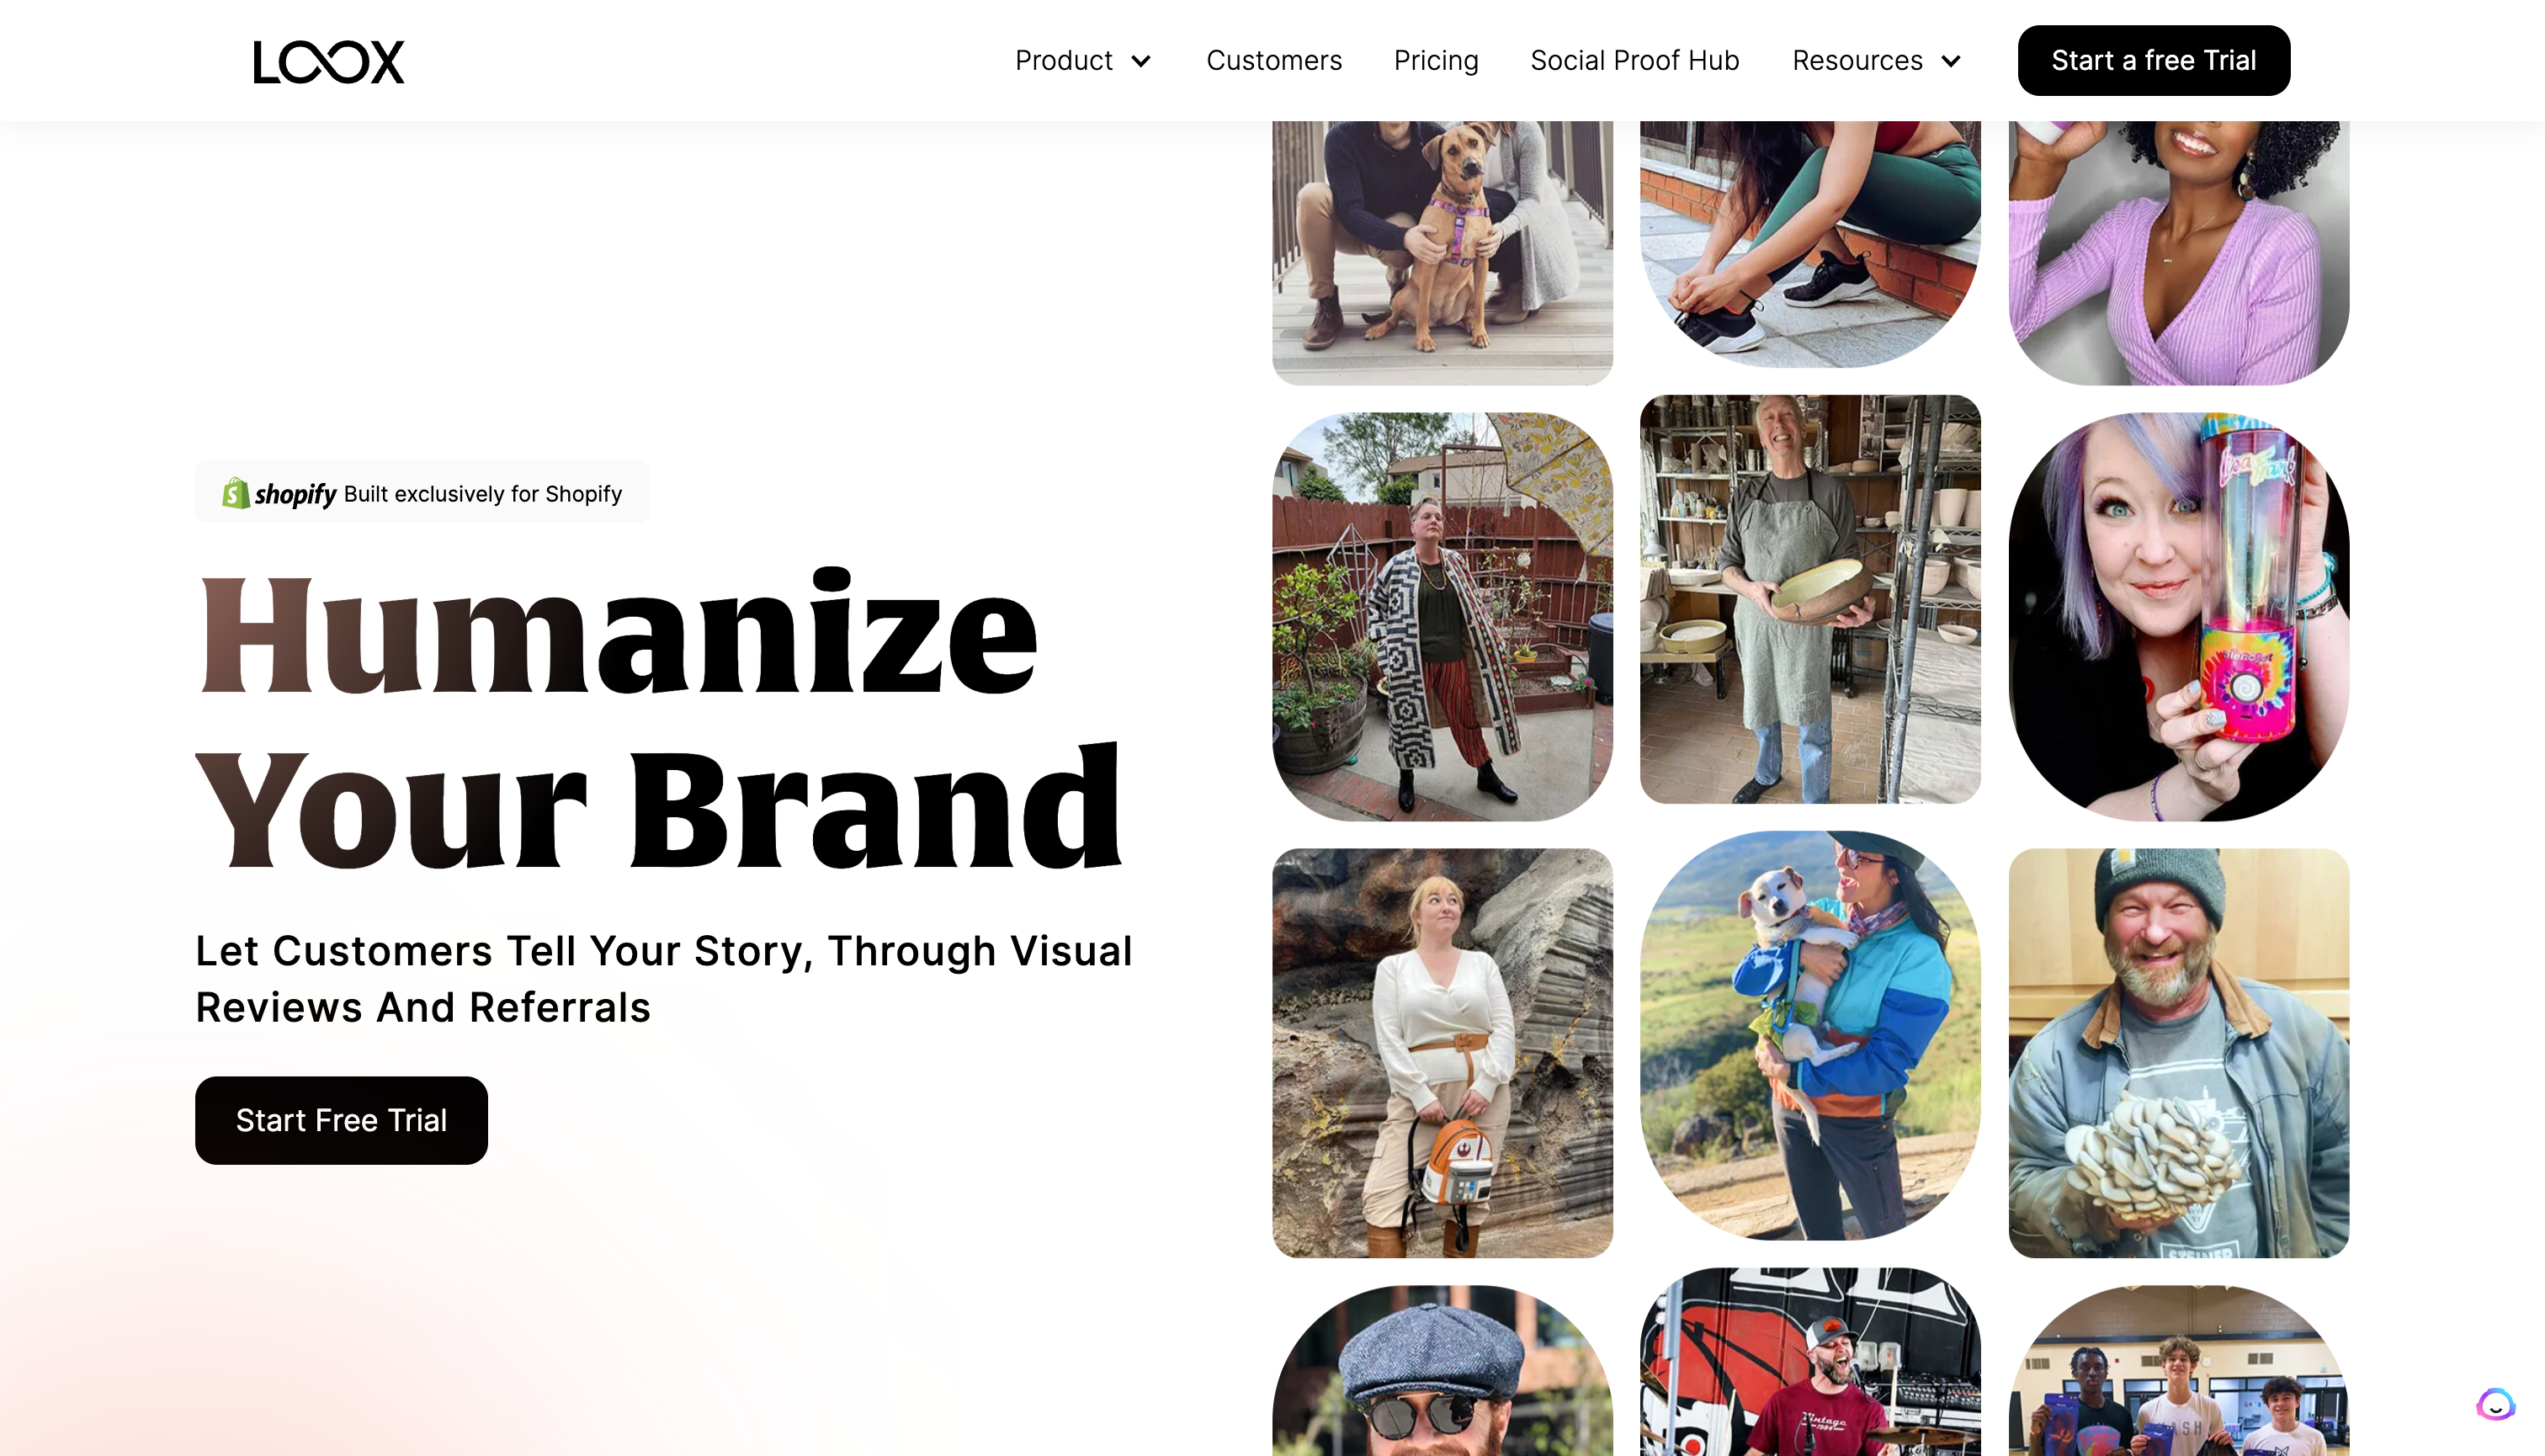 Loox - Humanize your brand